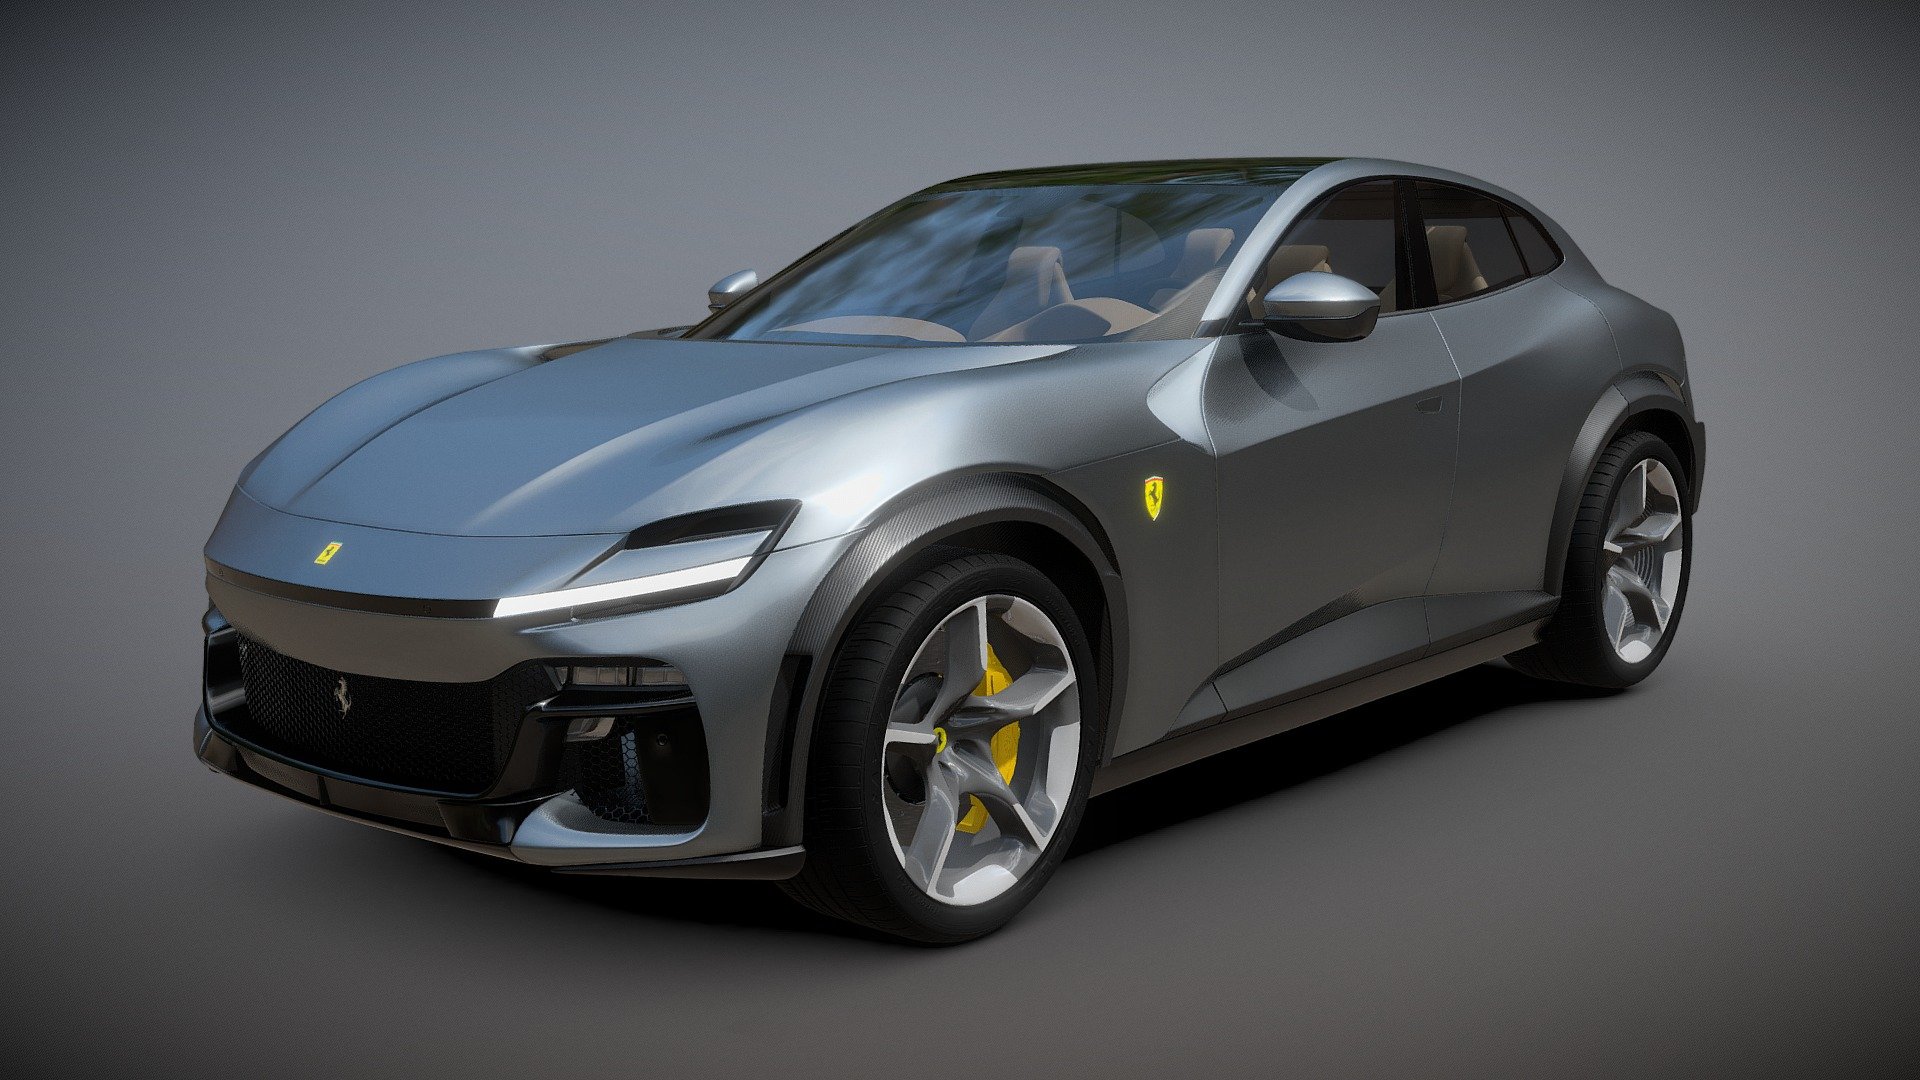 this is the 3d model of the new Ferrari's SUV - the PuroSangue

3D Model features:


editable mesh included with modifiers 
base model has 200k polys 
include clean applied modifiers version, with 850k polys, unwraped UVs 
collapsed version exported to most common 3d formats including : FBX, OBJ, Collada, Gltf, Pixar USD, Allembic 
ready to render with both Cycles and Eevee

The Ferrari Purosangue (Type F175) is a high-performance SUV by Italian automobile manufacturer Ferrari that was introduced on 13 September 2022. It is Ferrari's first SUV and production 4-door. The Purosangue will be based on the same platform as the Ferrari Roma coupe, and will use fastback styling.

The Ferrari Purosangue will compete with other high-performance SUVs such as the Lamborghini Urus, Aston Martin DBX, and Bentley Bentayga. The SUV will use an eight-speed dual-clutch automatic transmission - Ferrari Purosangue - Buy Royalty Free 3D model by eMirage 3d model